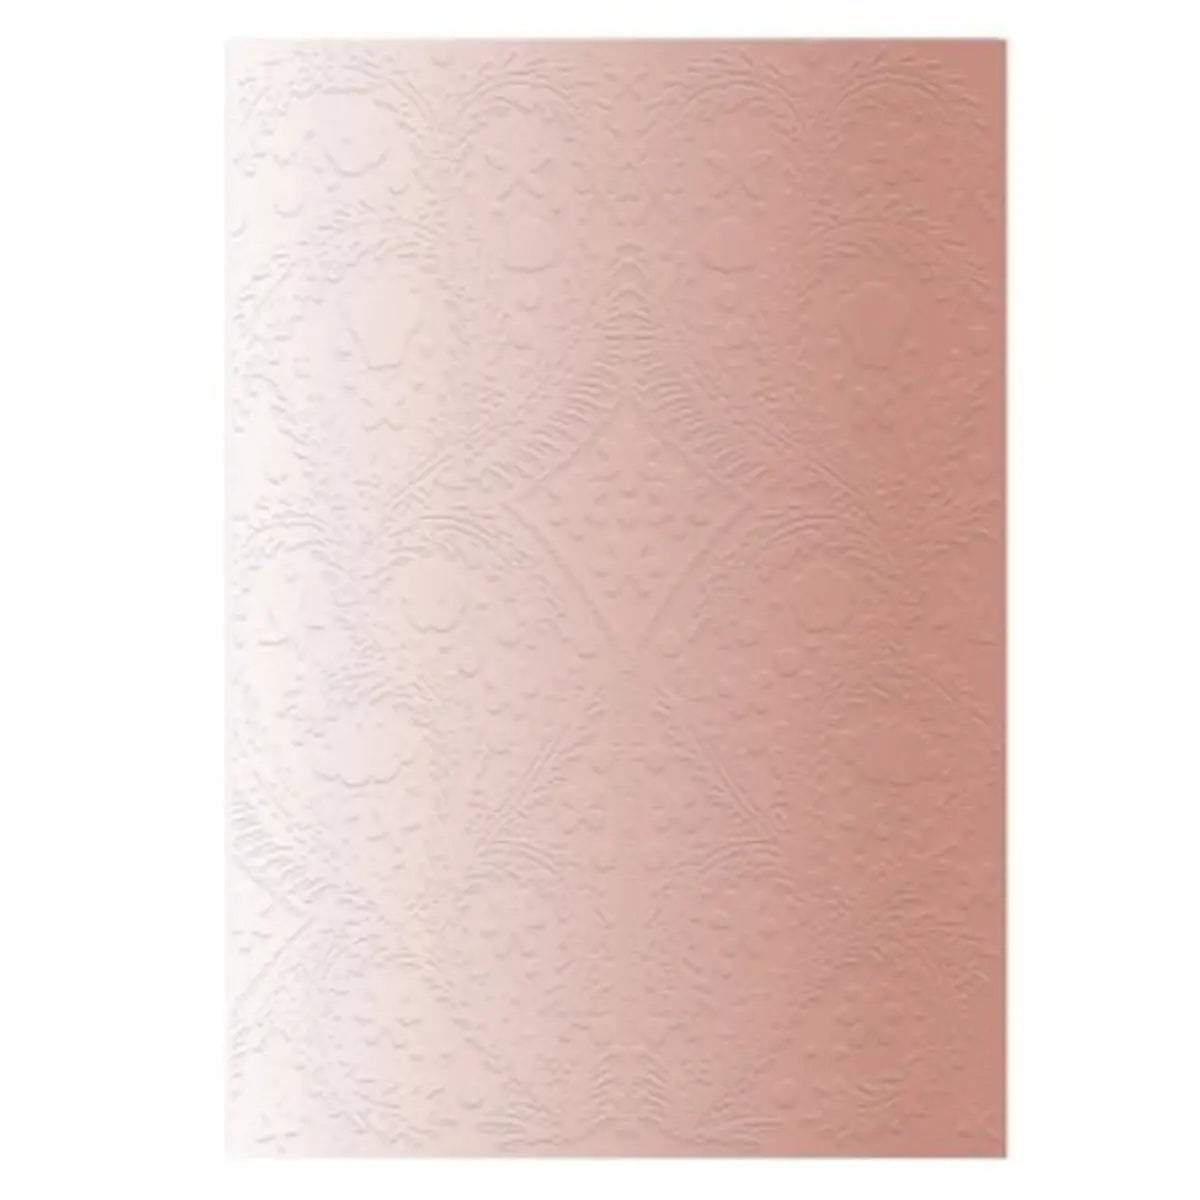 Hachette Christian Lacroix Ombre Paseo Notebook in Blush